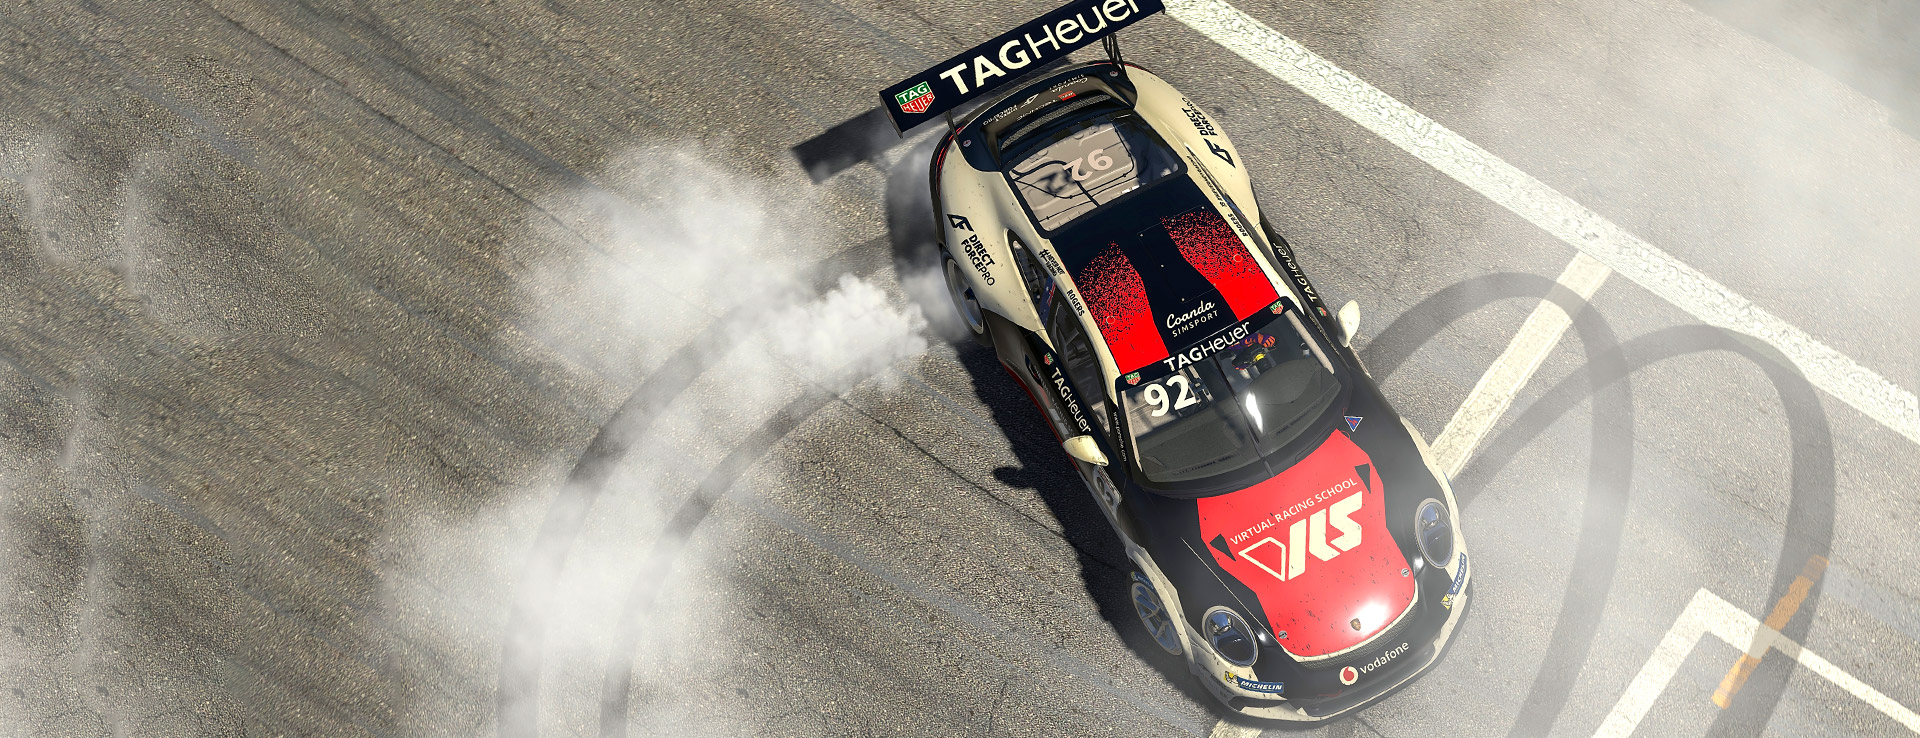 Porsche TAG Heuer Supercup car doing doughnuts on the track